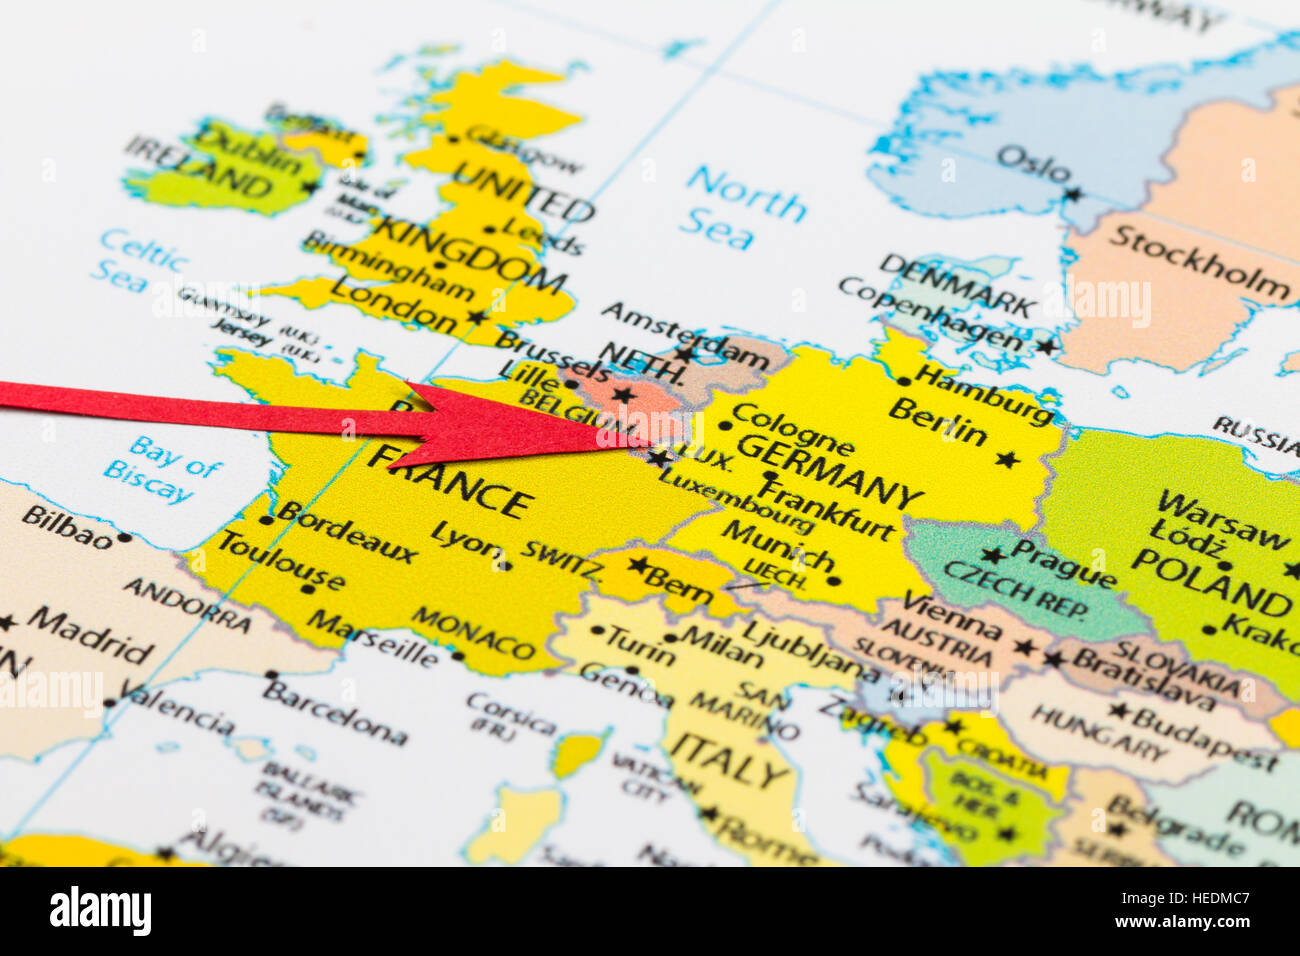 Red Arrow Pointing Luxembourg On The Map Of Europe Continent Stock Photo Alamy